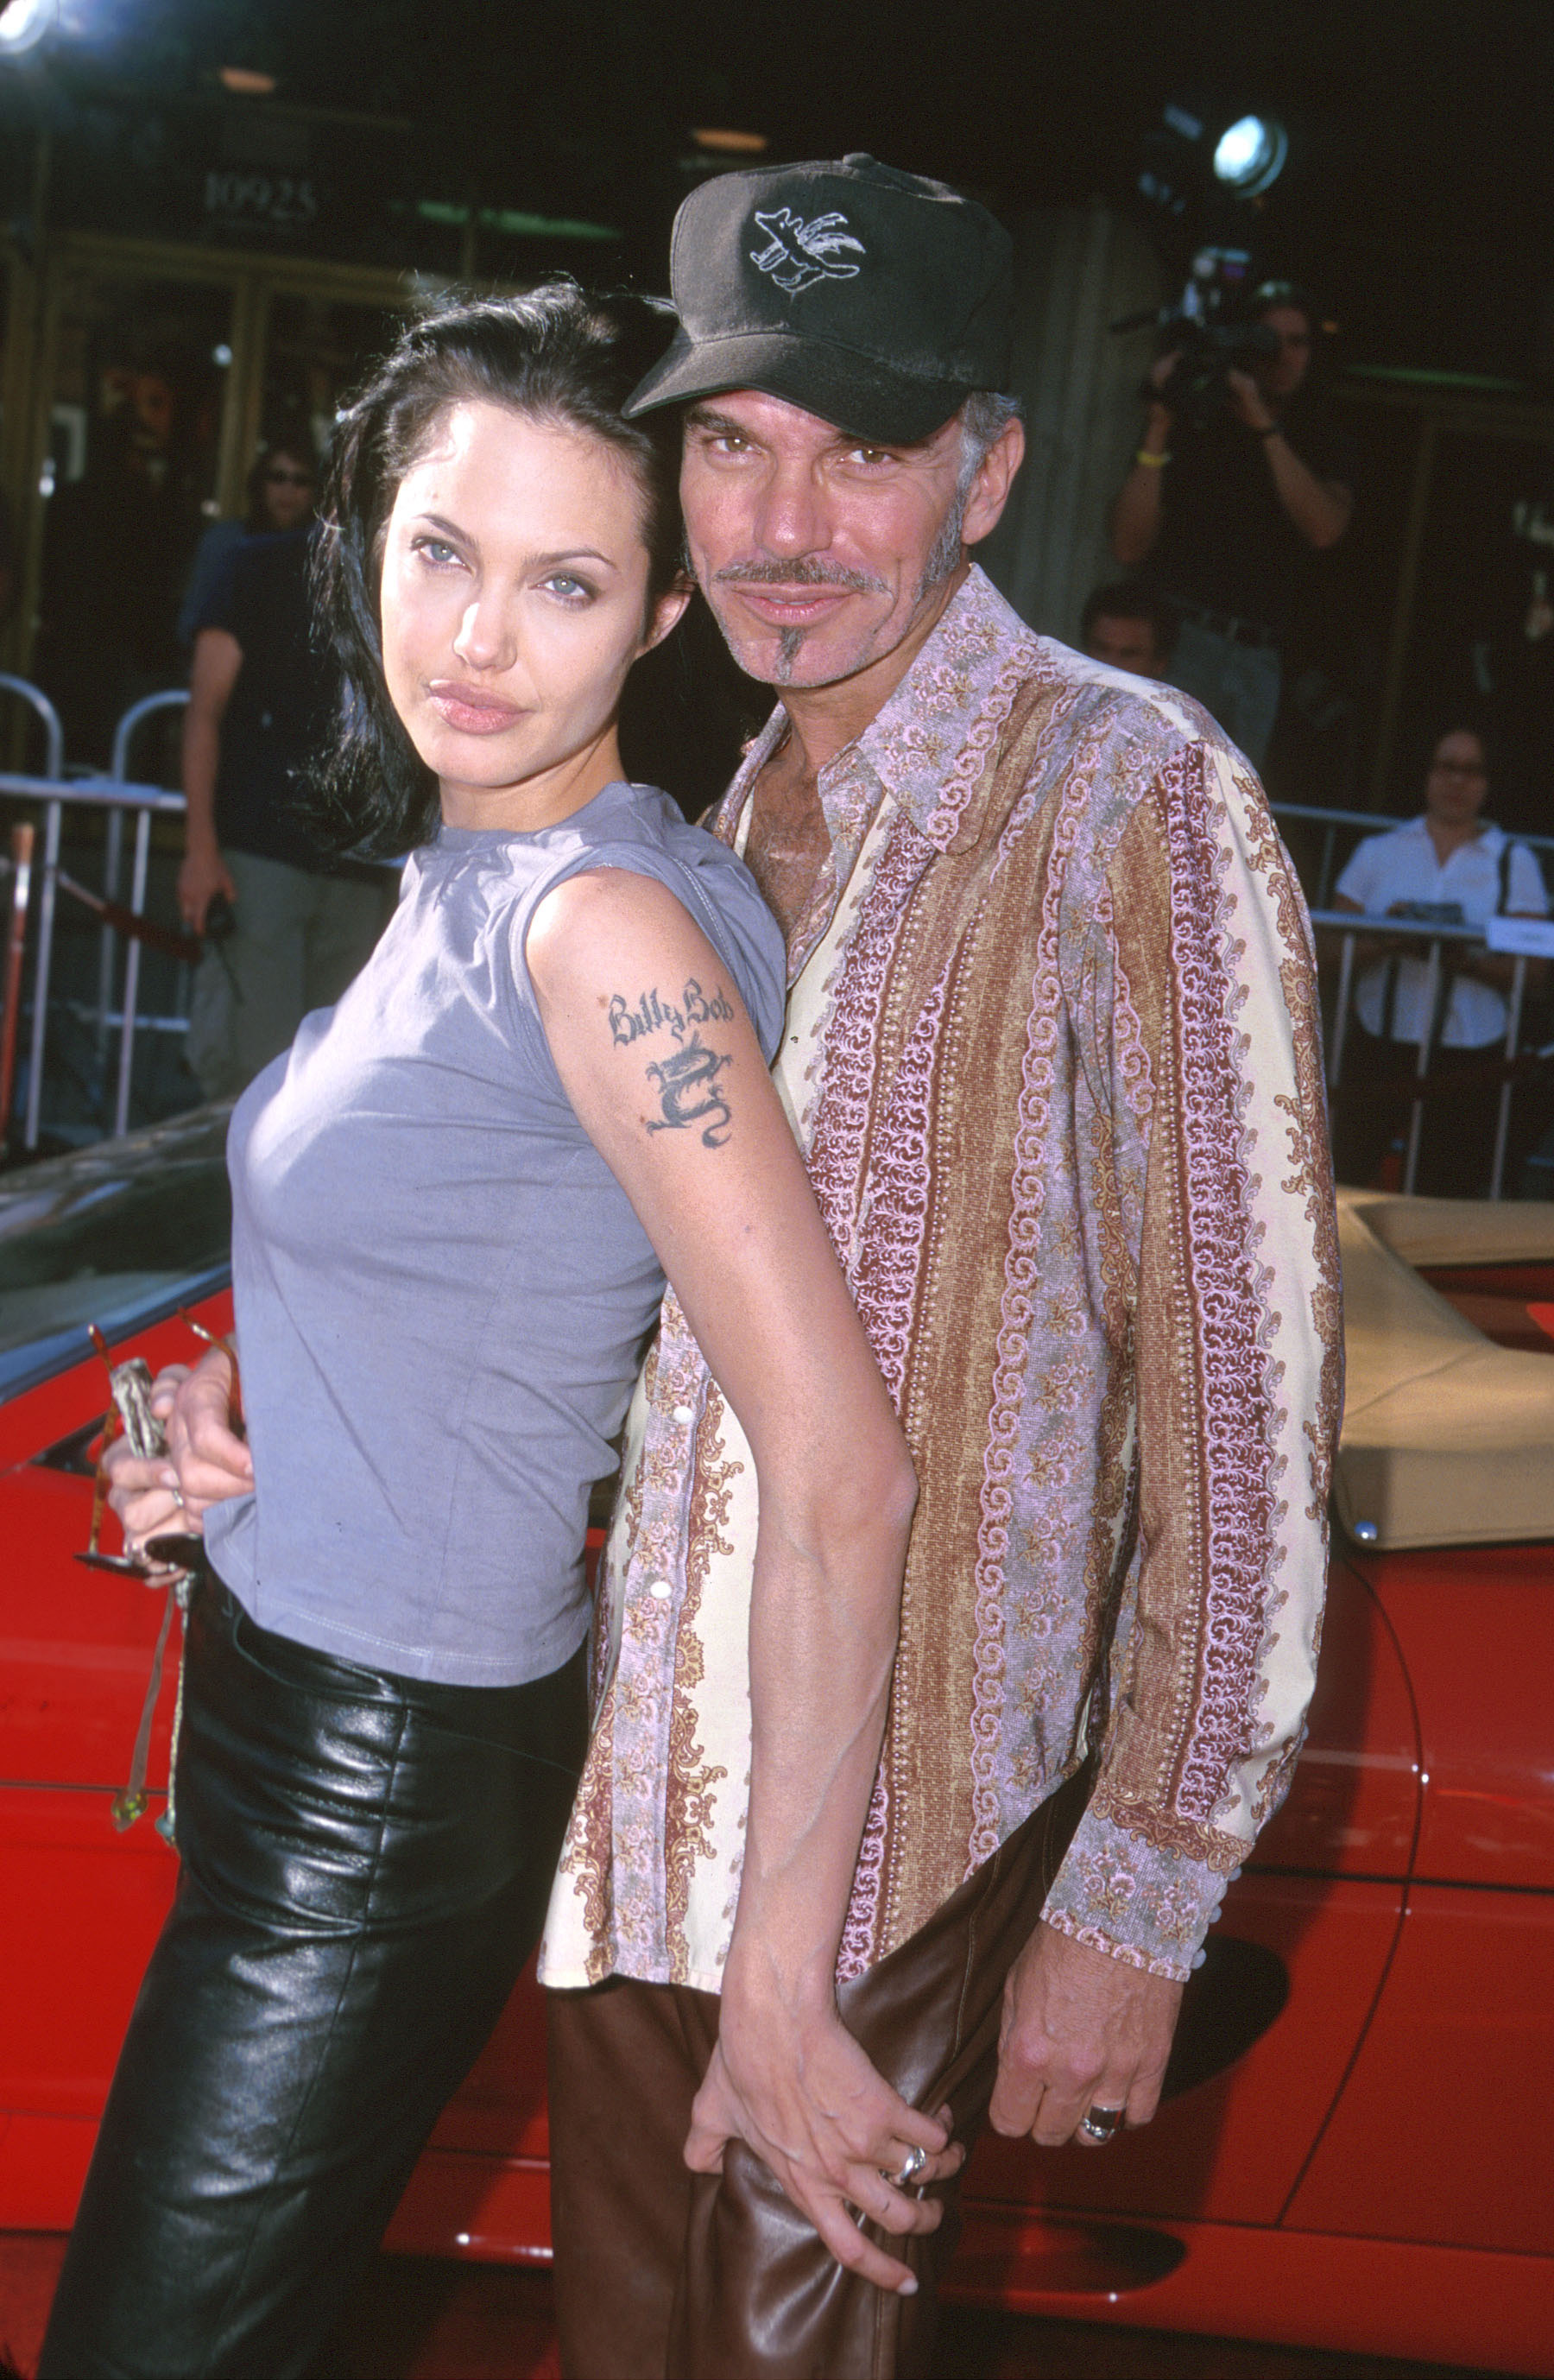 angelina jolie grabbing billy bob thorntons leg and posing at a movie premiere